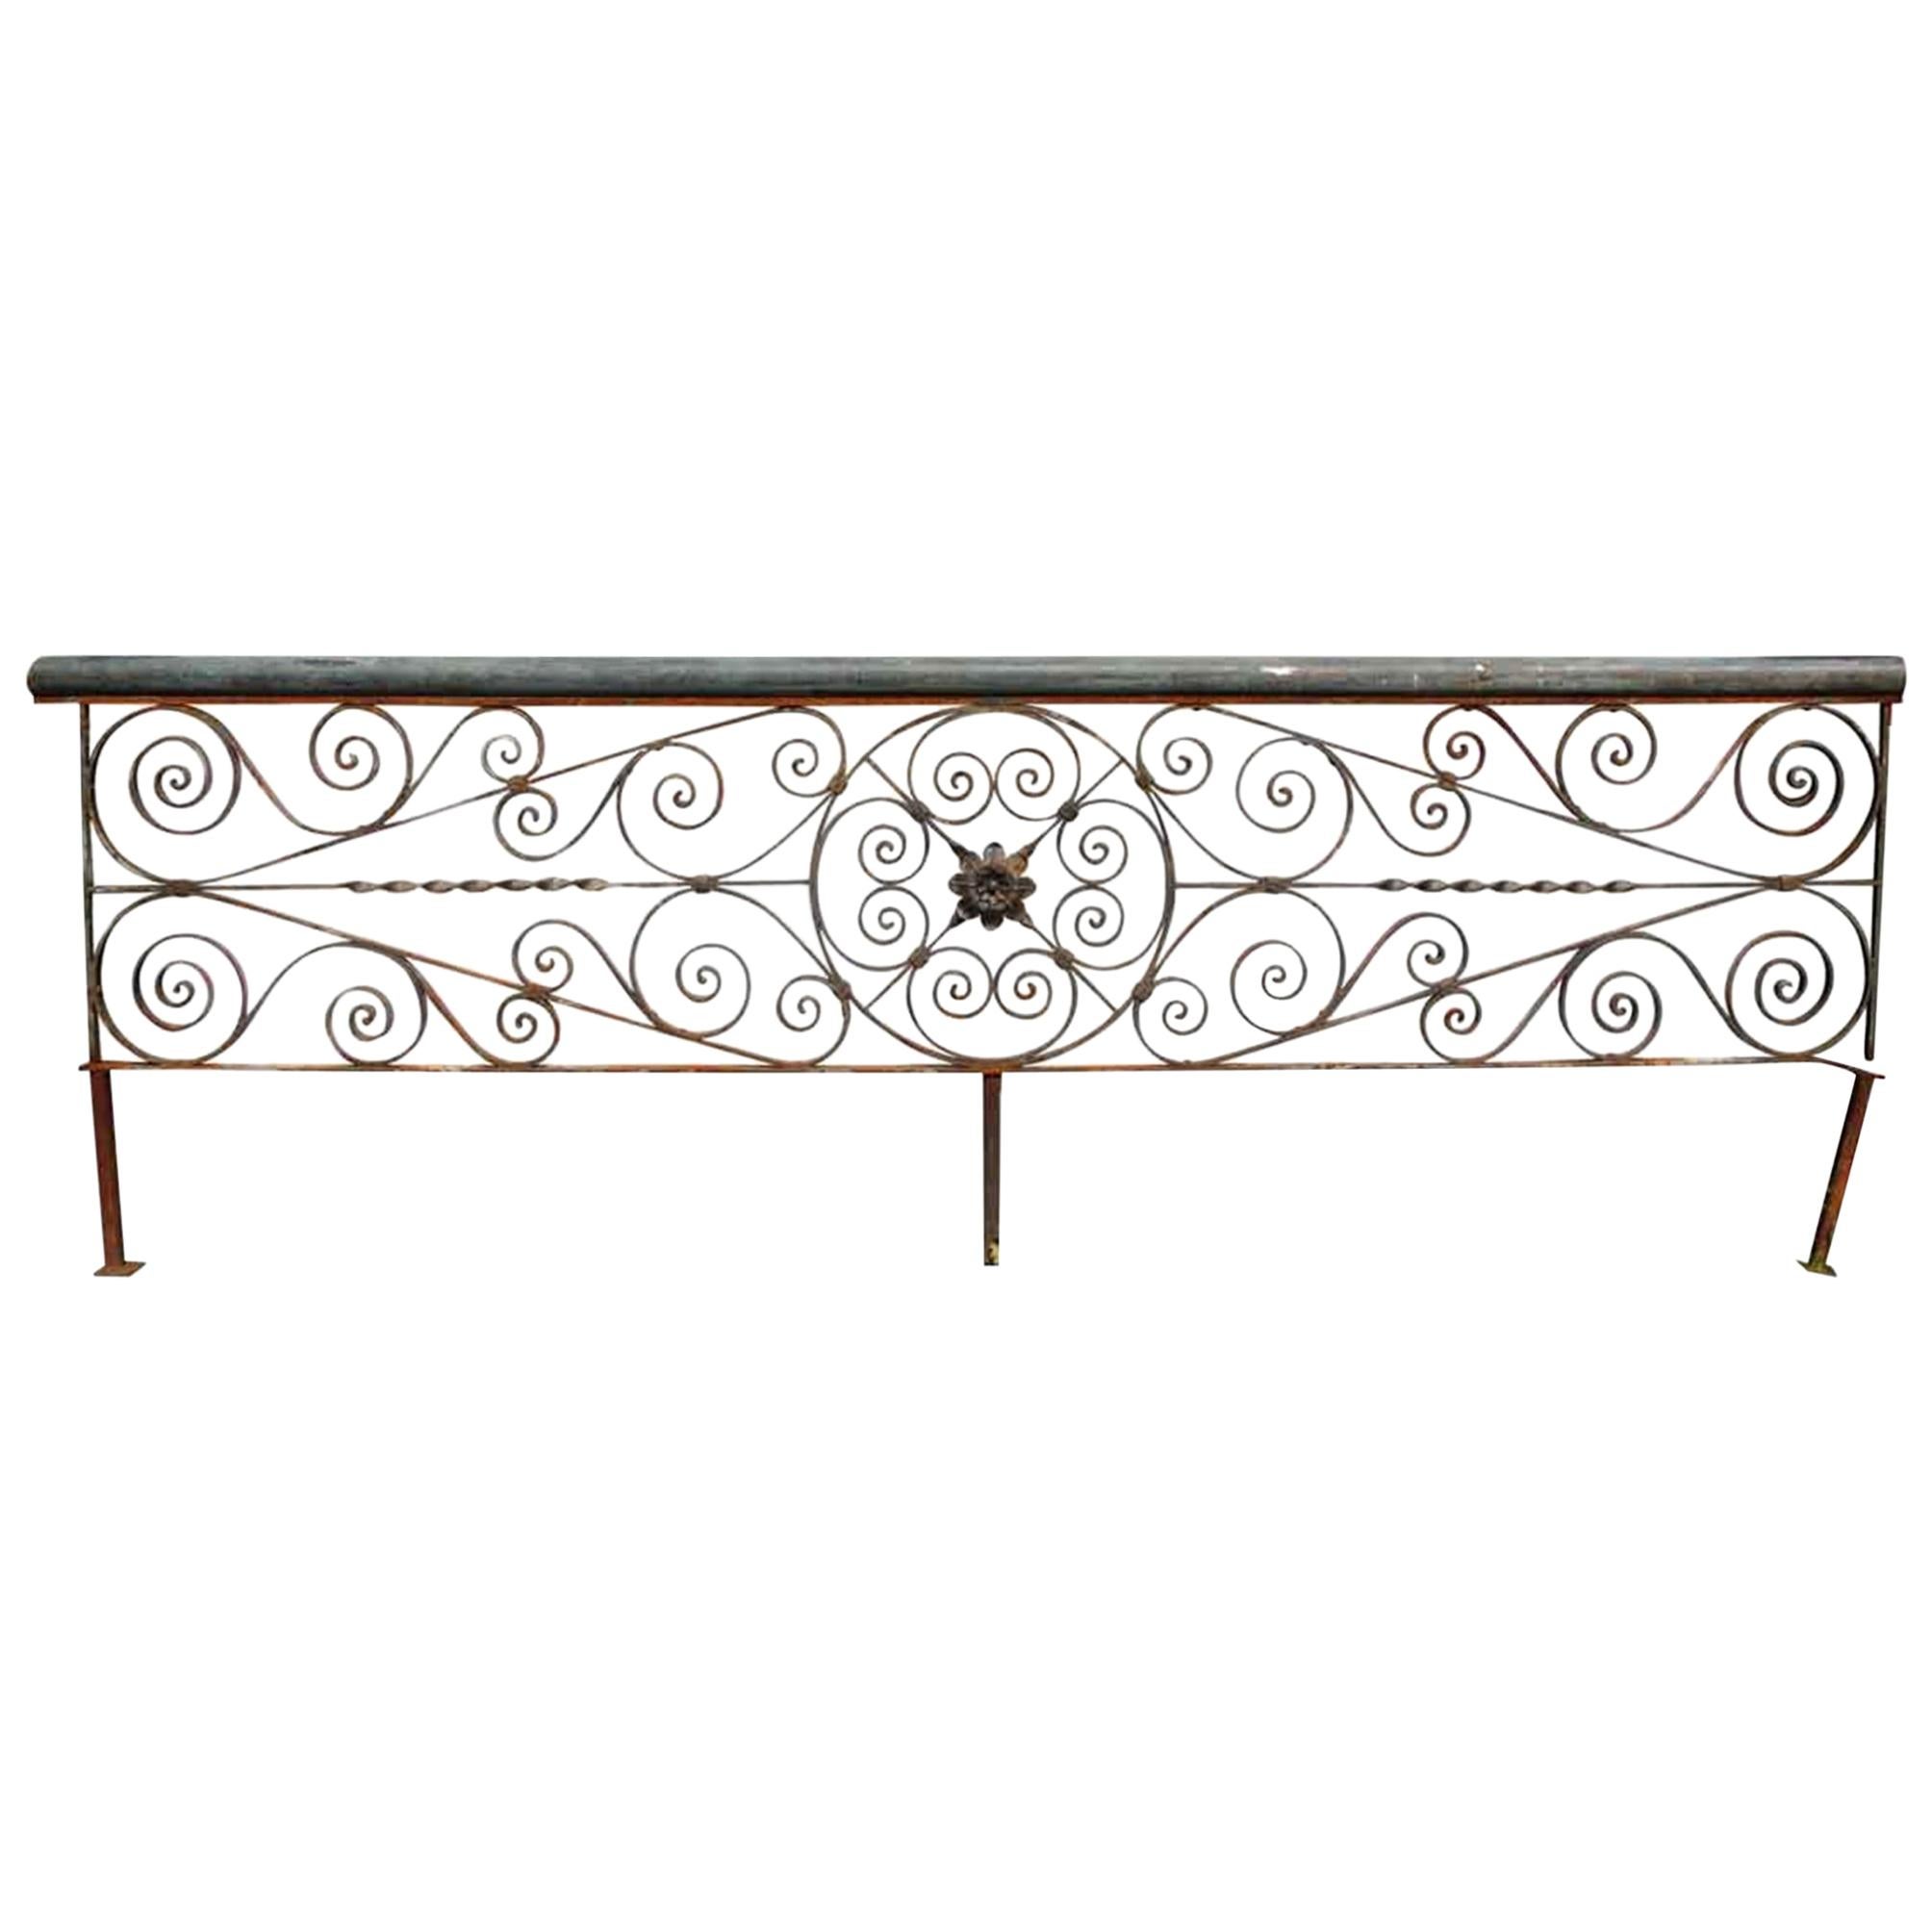 1920s Ornate Hand Wrought Iron Floral Balcony Railing Piece